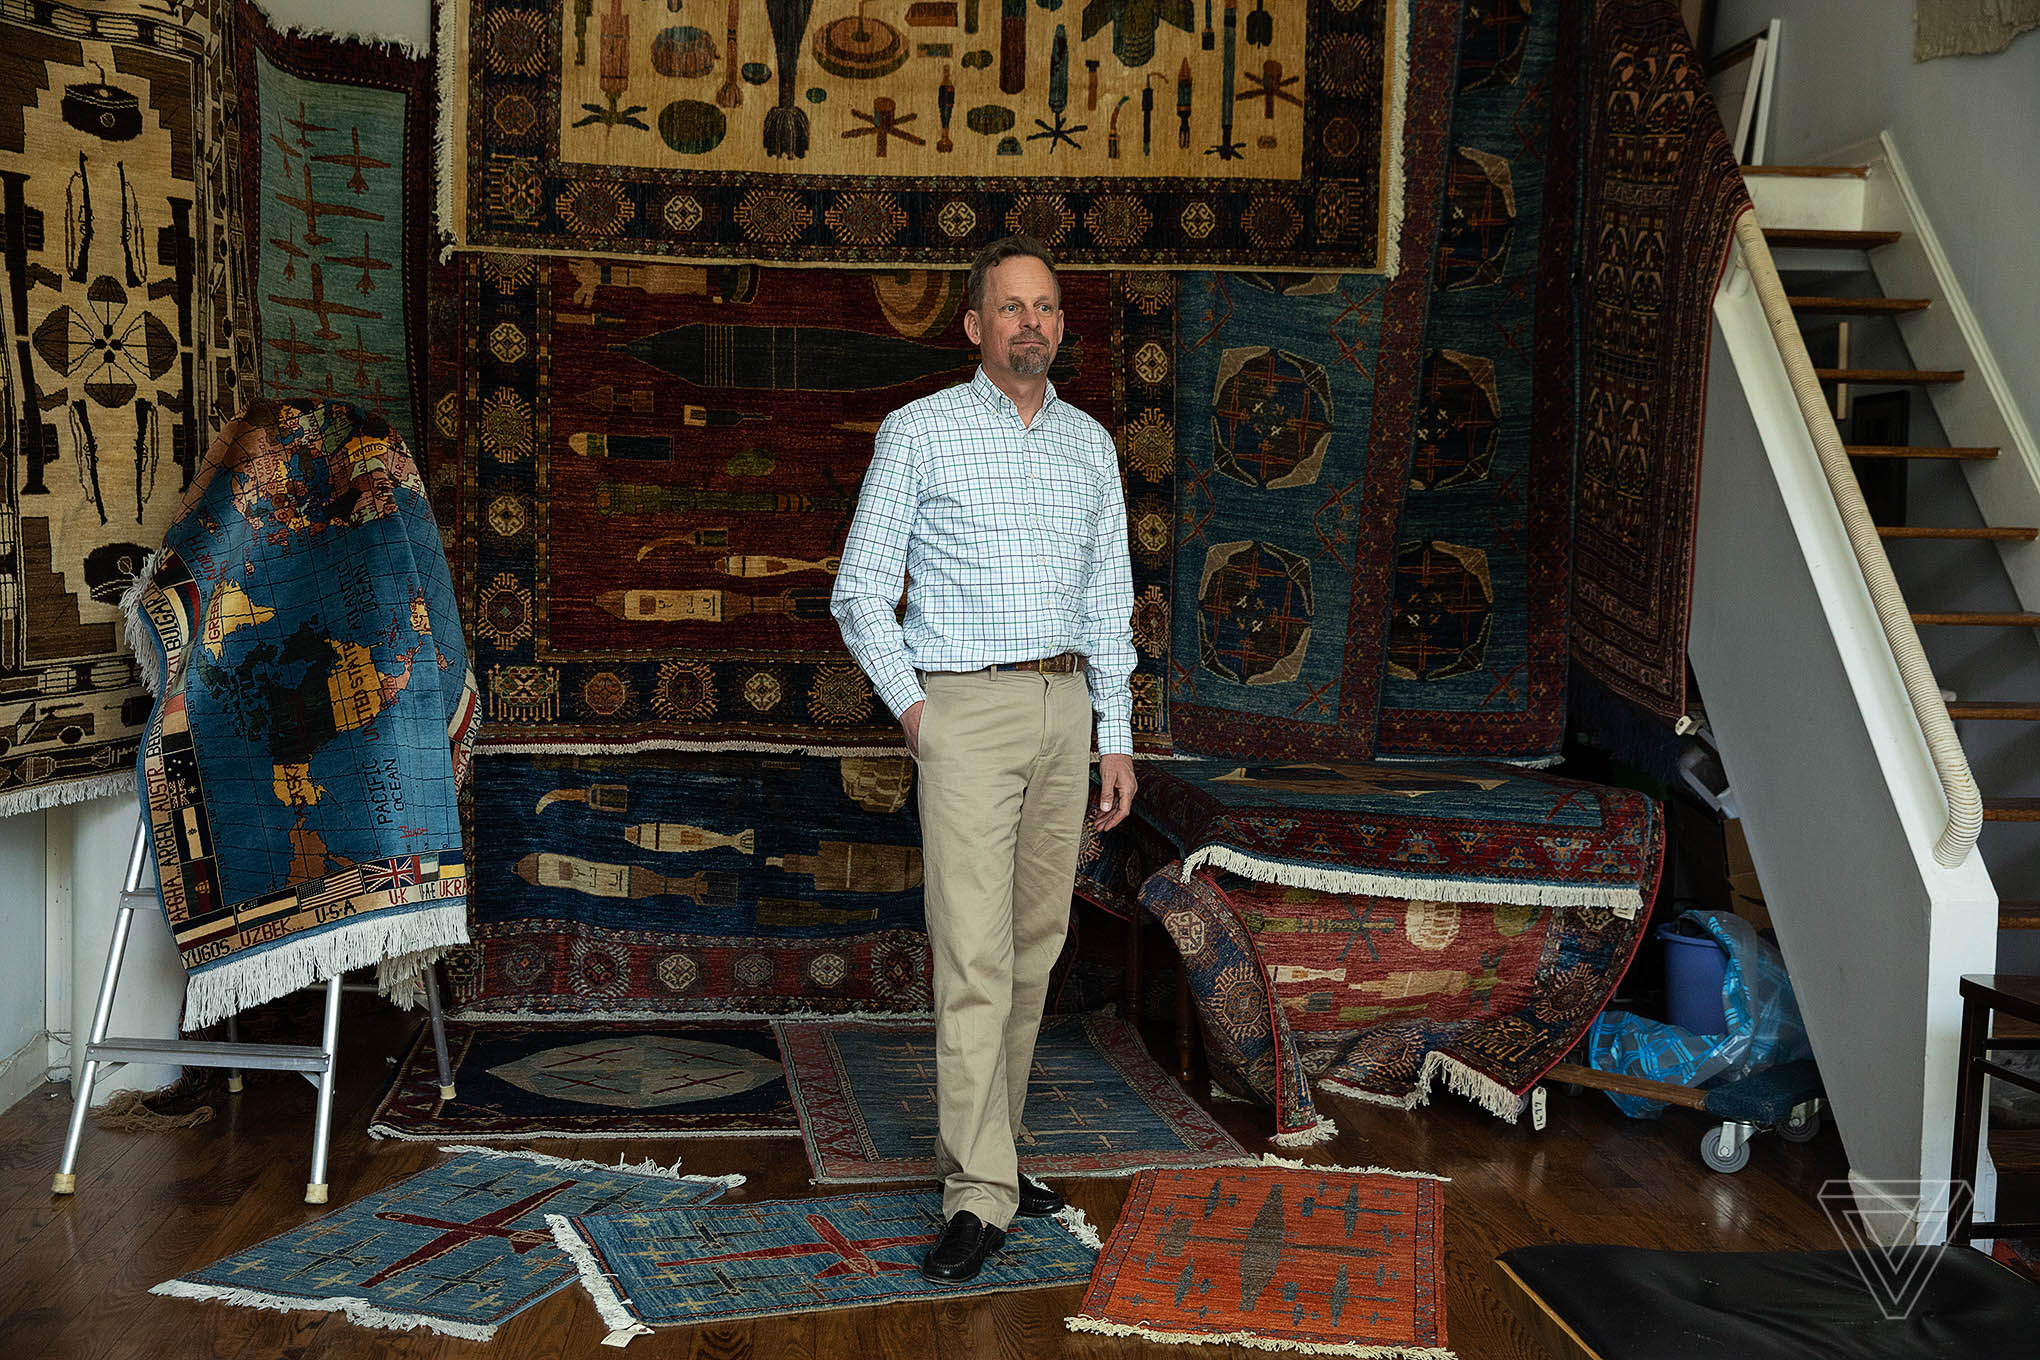 Kevin Sudeith surrounded by war rugs in vibrant red and blue patterns.